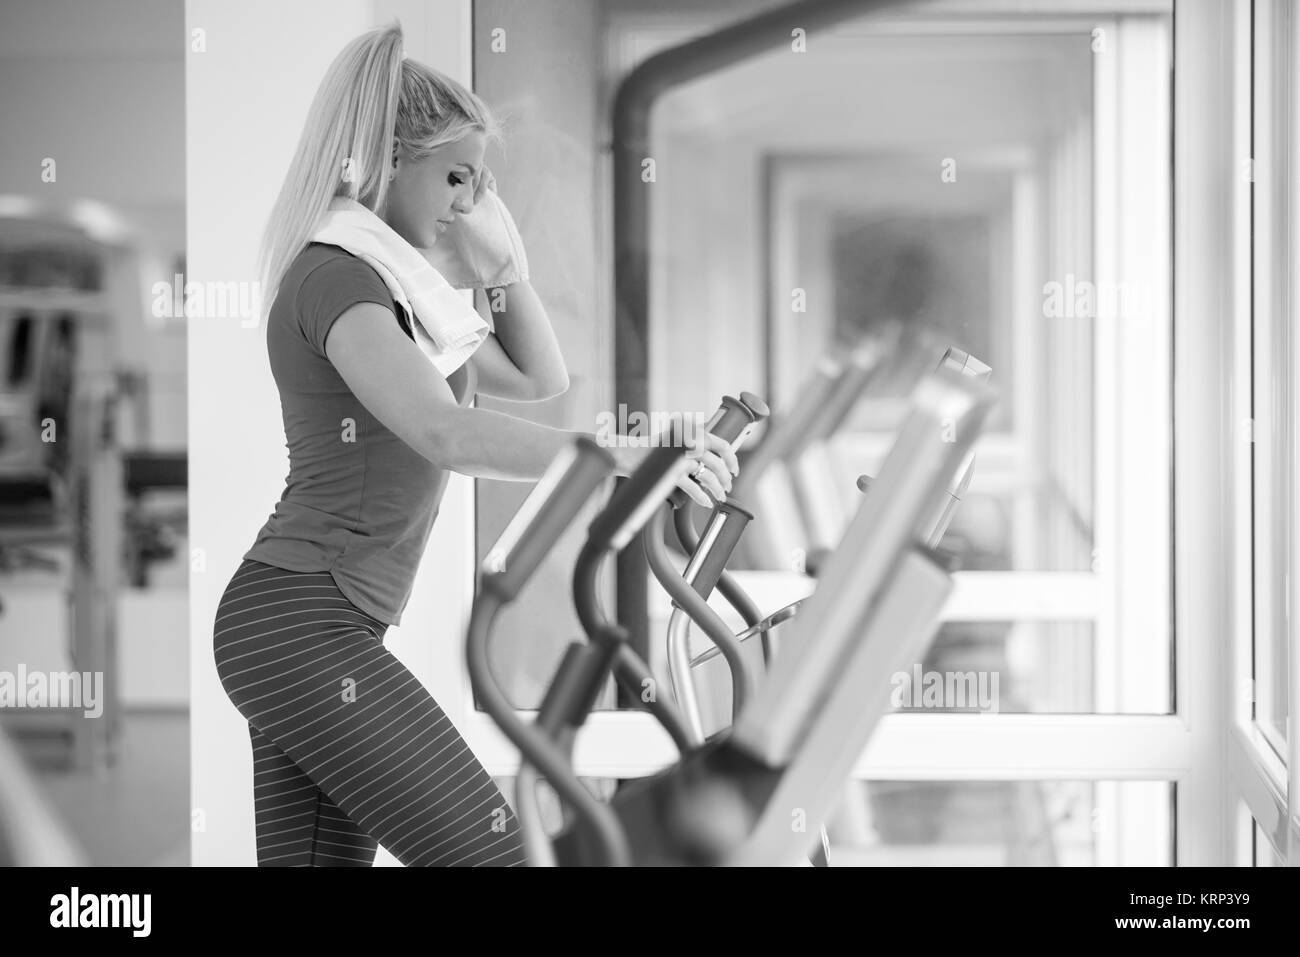 sport, fitness, lifestyle, technology and people concept - woman with or player and earphones exercising on treadmill in gym Stock Photo